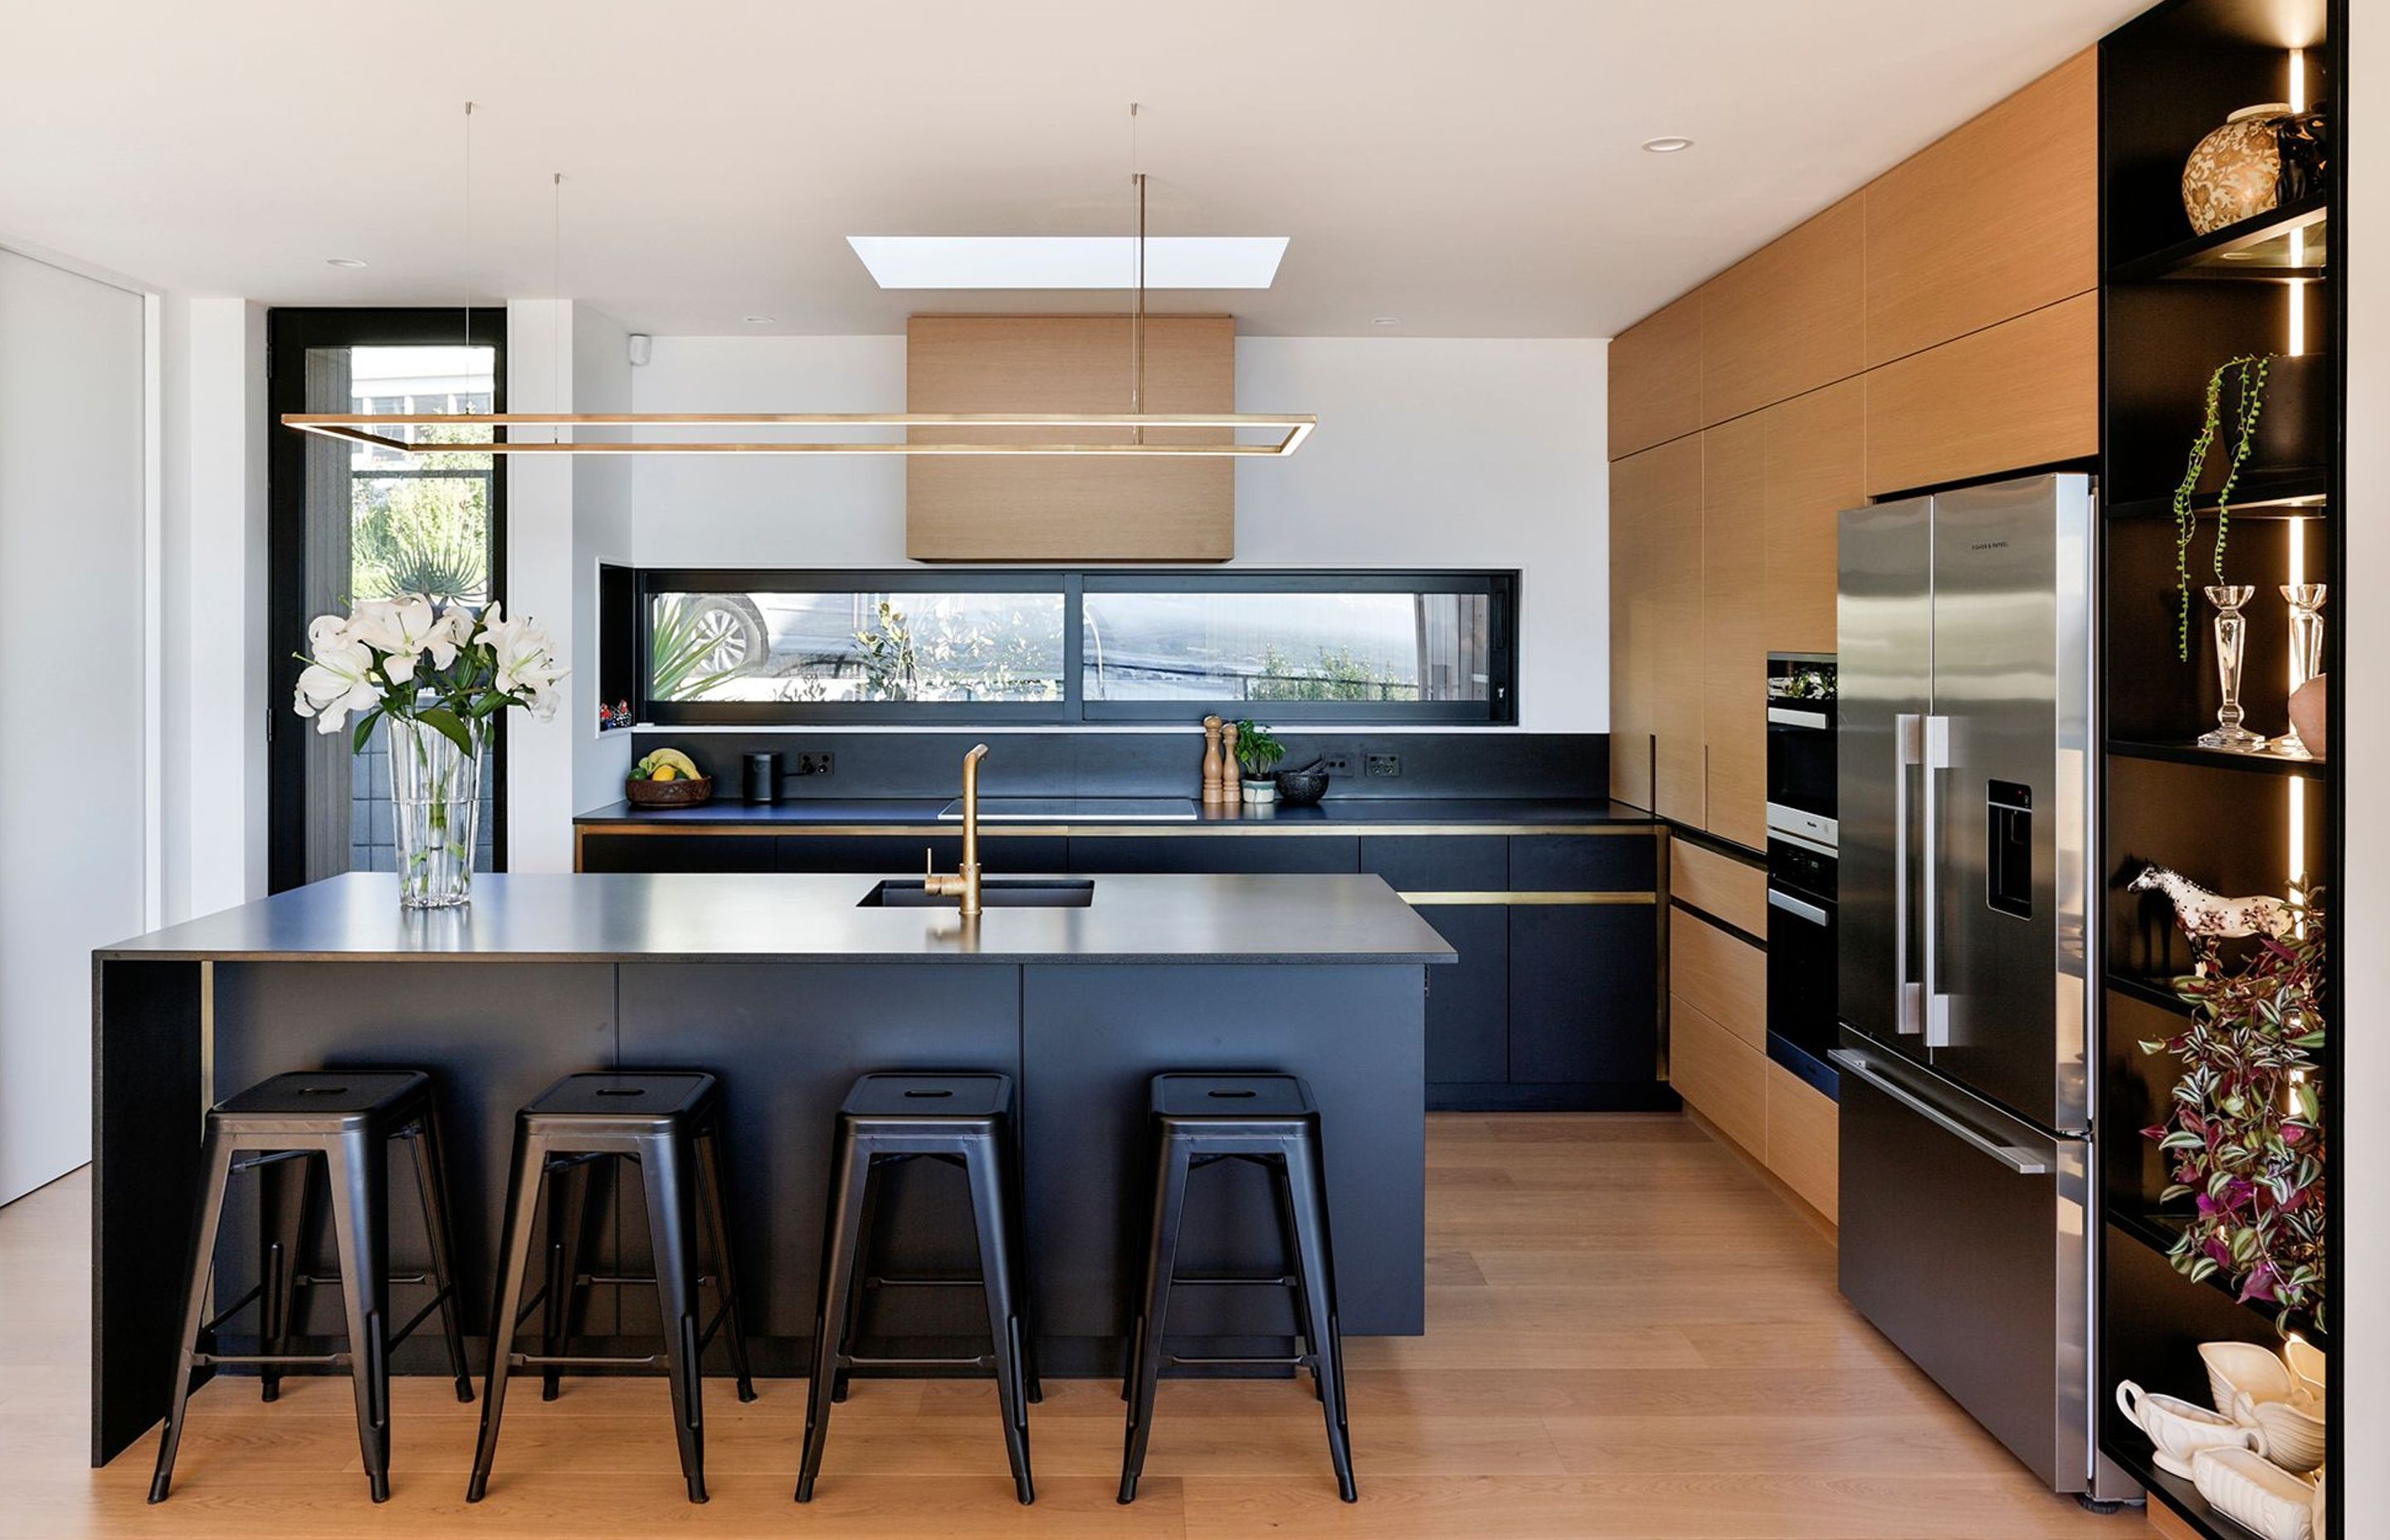 A skylight over the kitchen draws light into the space, aided by a rectilinear feature light over the benchtop, The main entrance is on the left hand side.